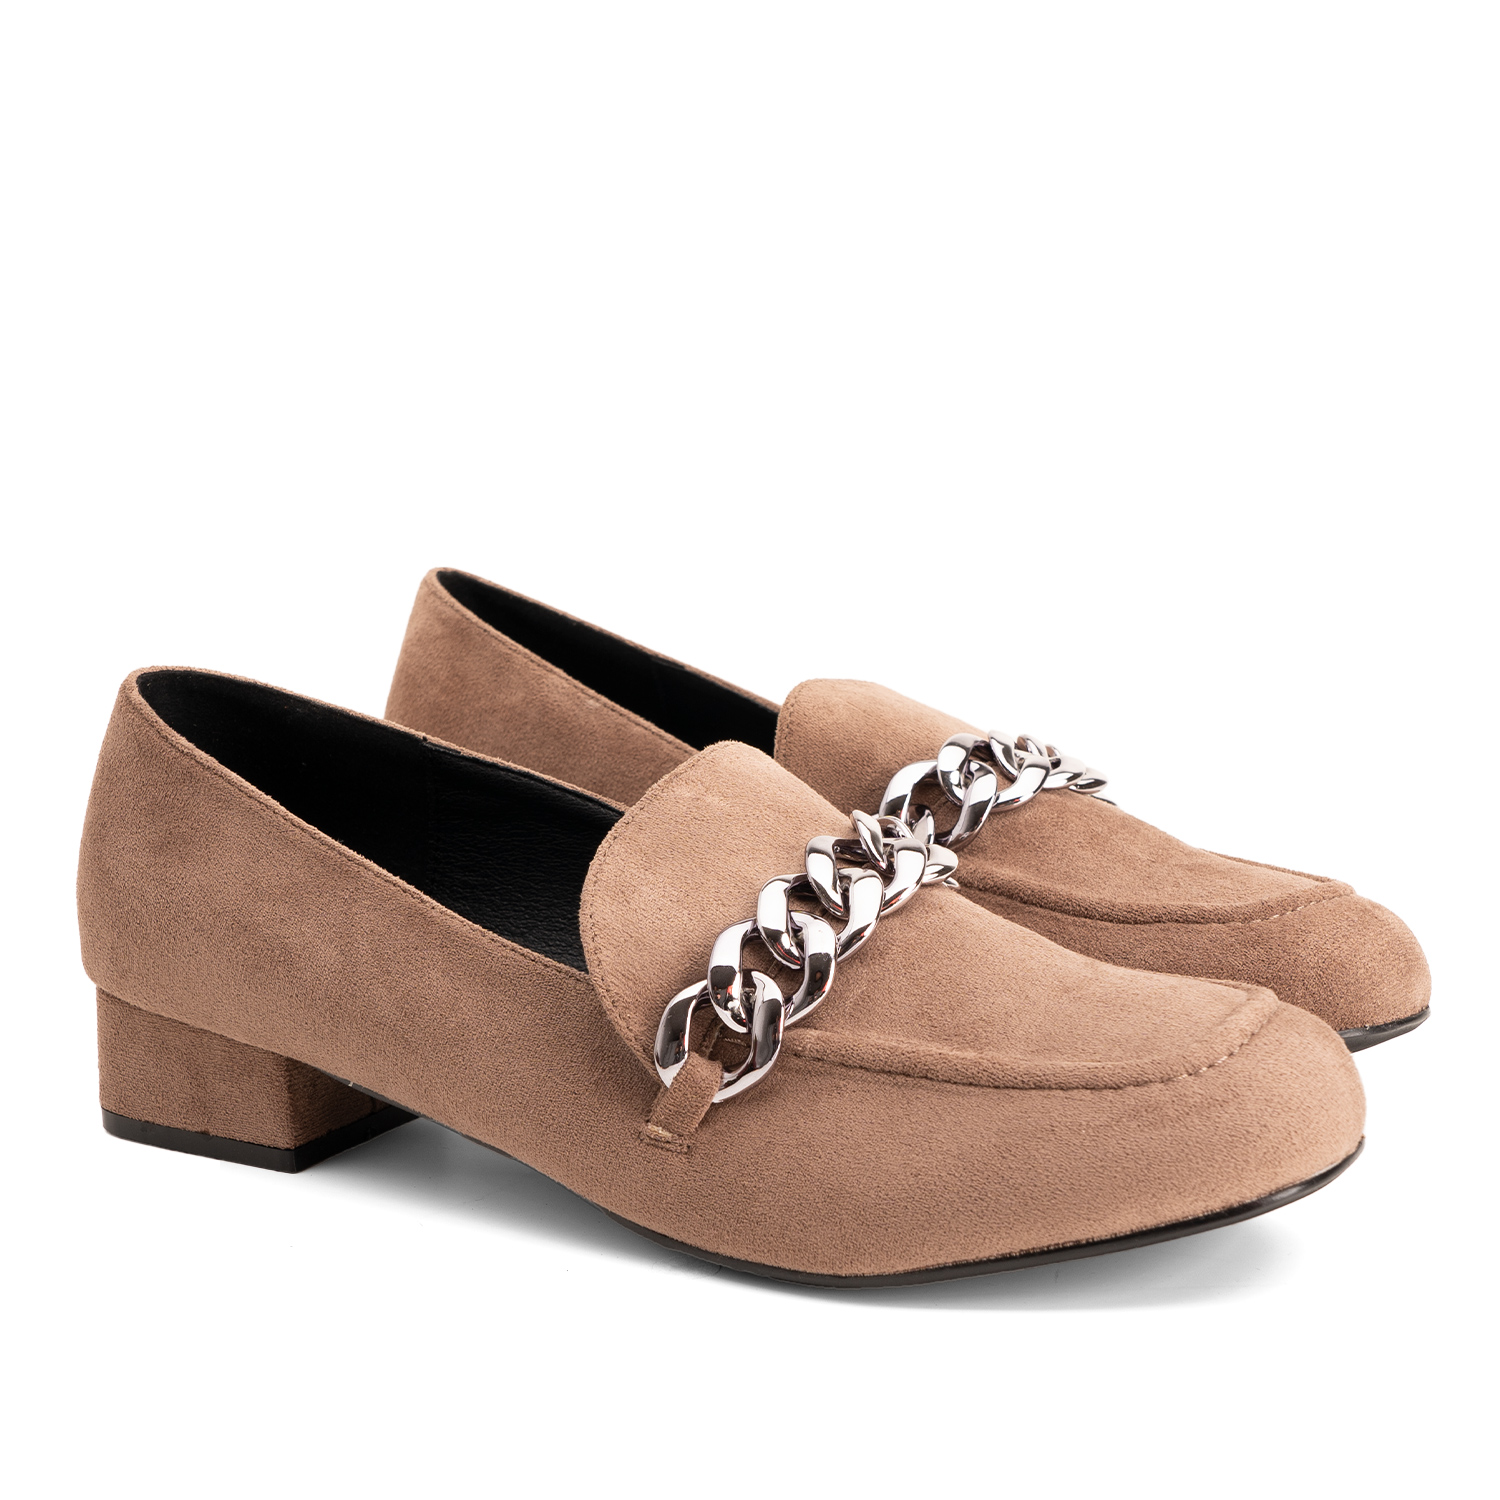 Moccasins in light brown faux suede with chain link detail 